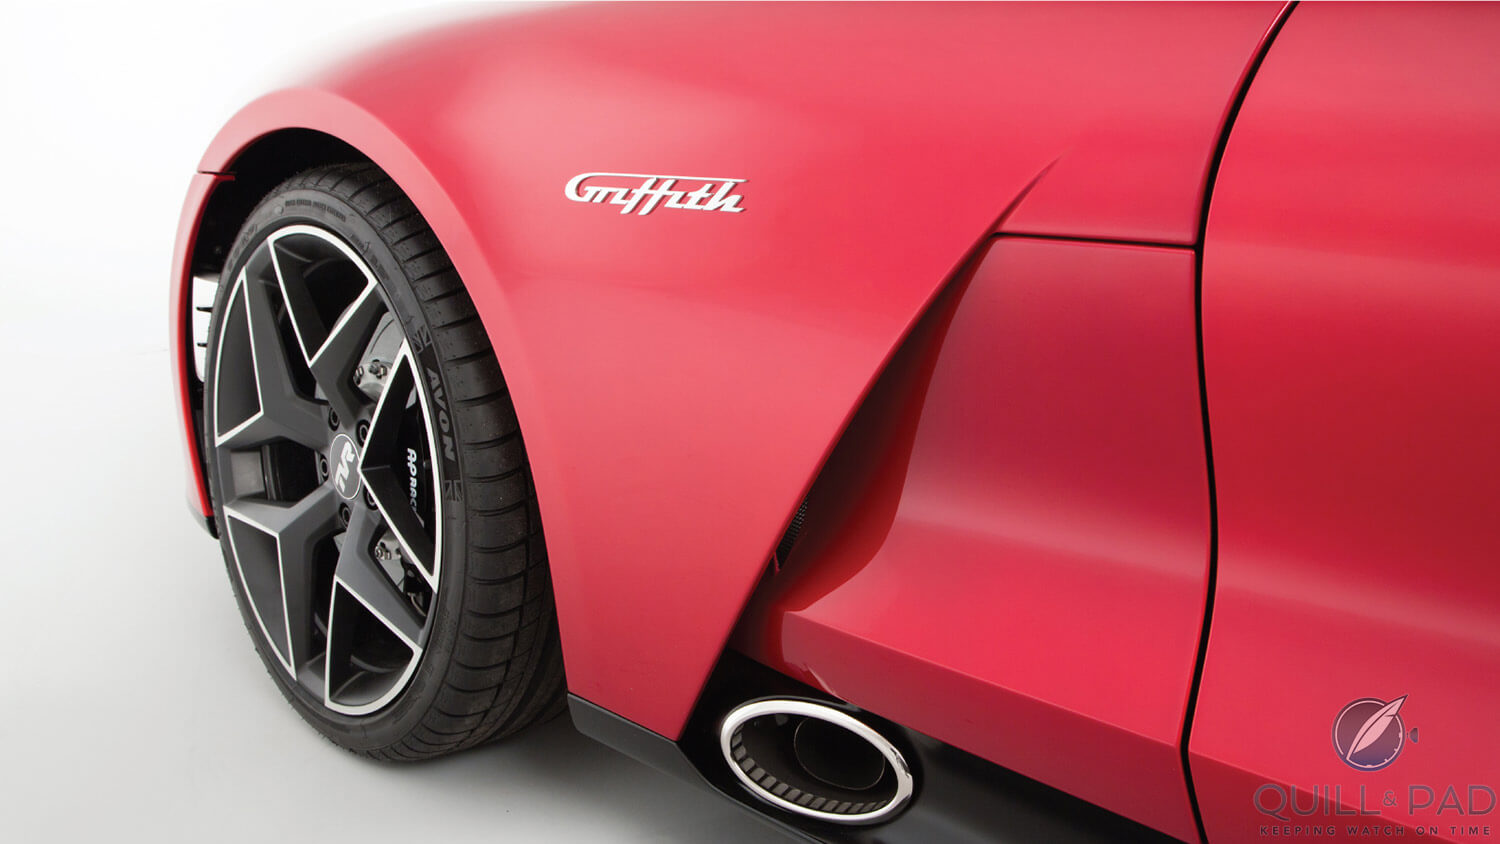 Massive forward exhaust on the 2018 TVR Griffith